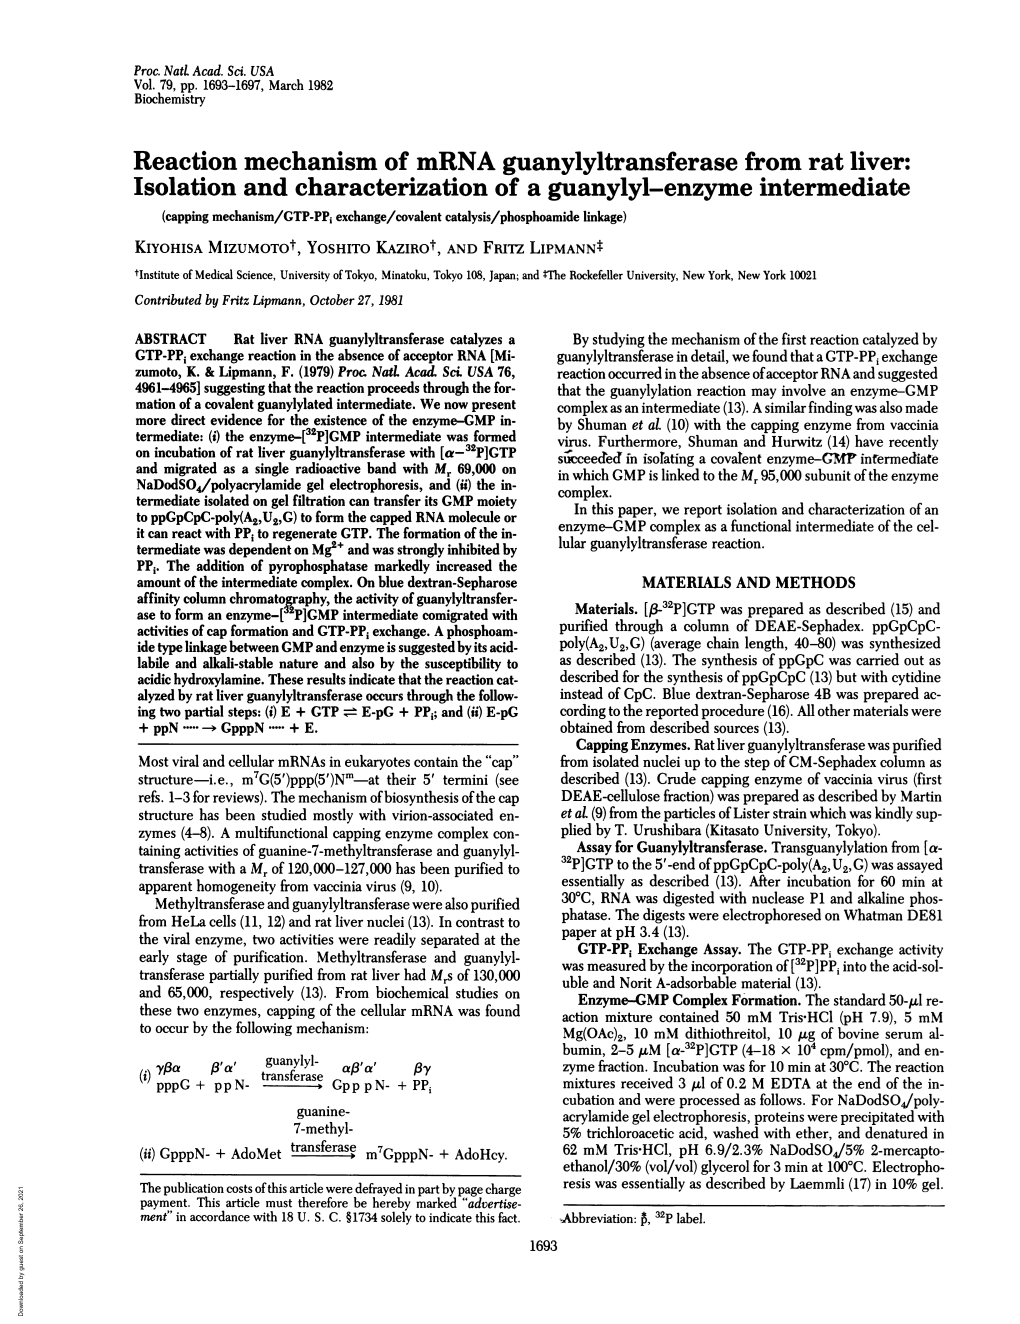 Reaction Mechanism of Mrna Guanylyltransferase from Rat Liver